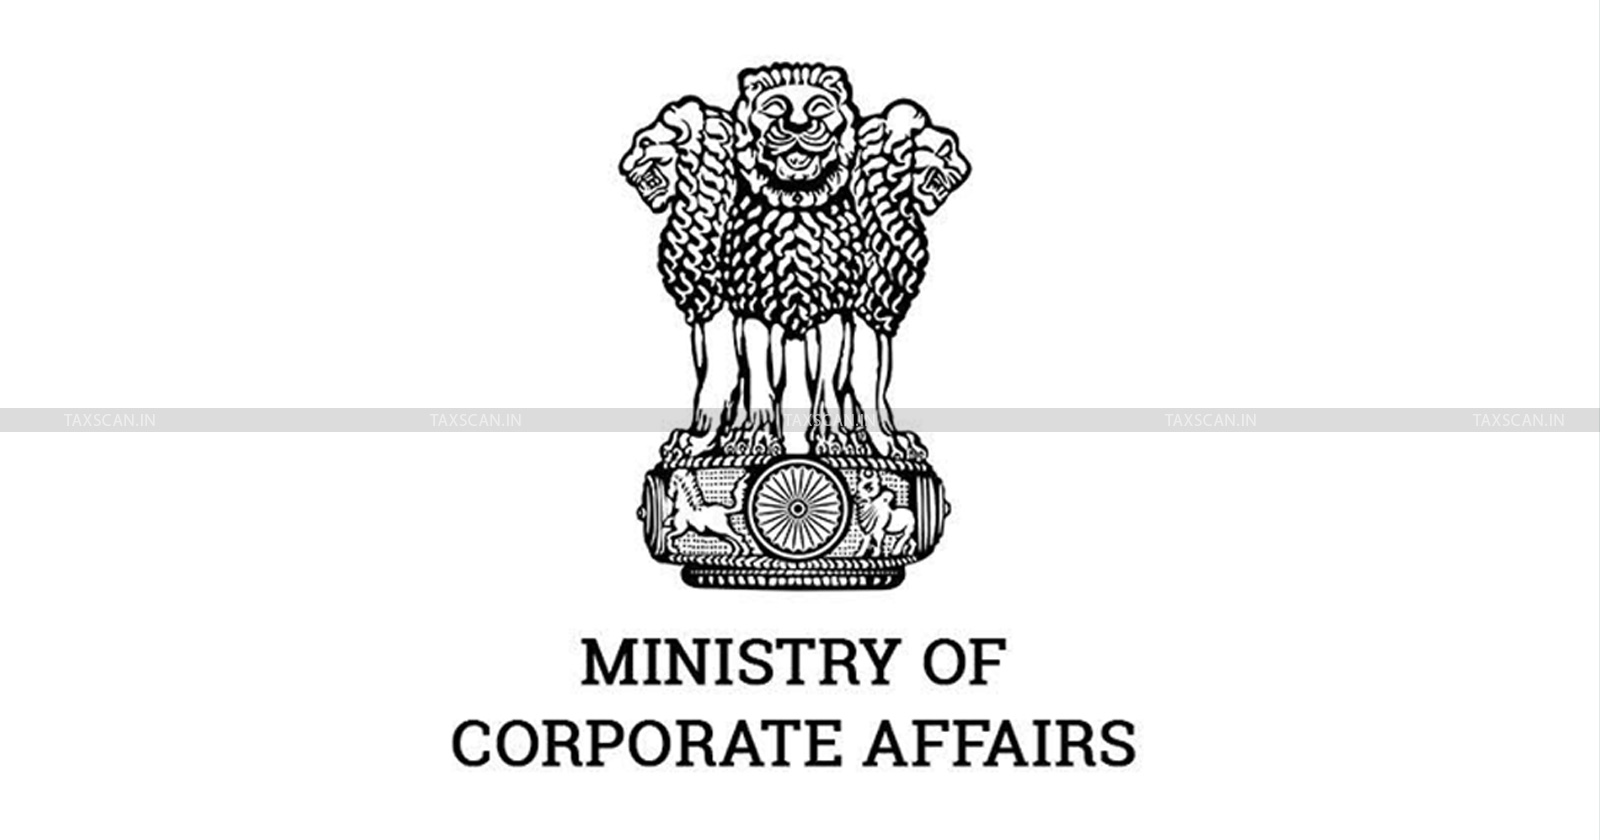 Ministry of Corporate Affairs - MCA - MCA Central Processing Centre - CPC for Corporate Filings - MCA Corporate Filings Online - Taxscan